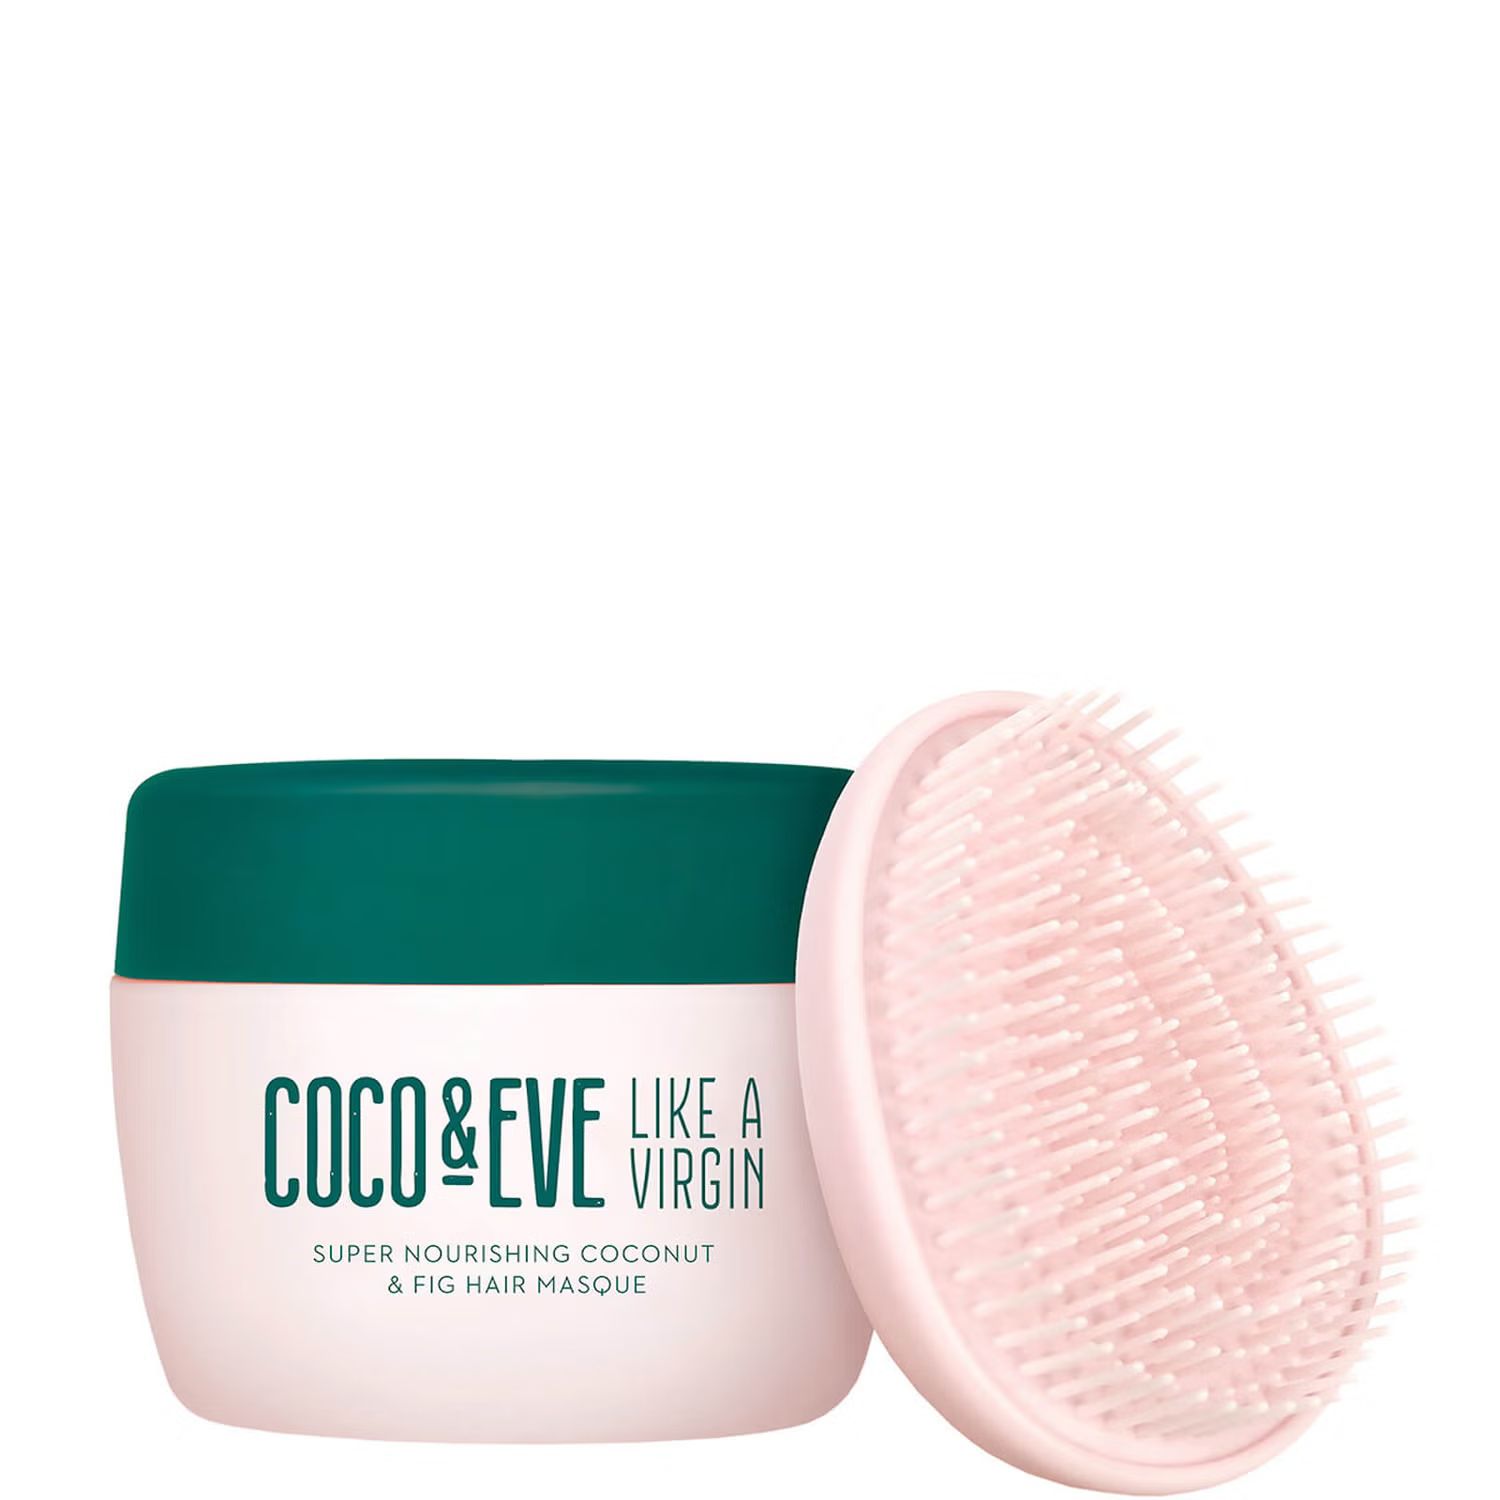 Coco & Eve Super Nourishing Coconut & Fig Hair Masque (Various Sizes) | Look Fantastic (ROW)